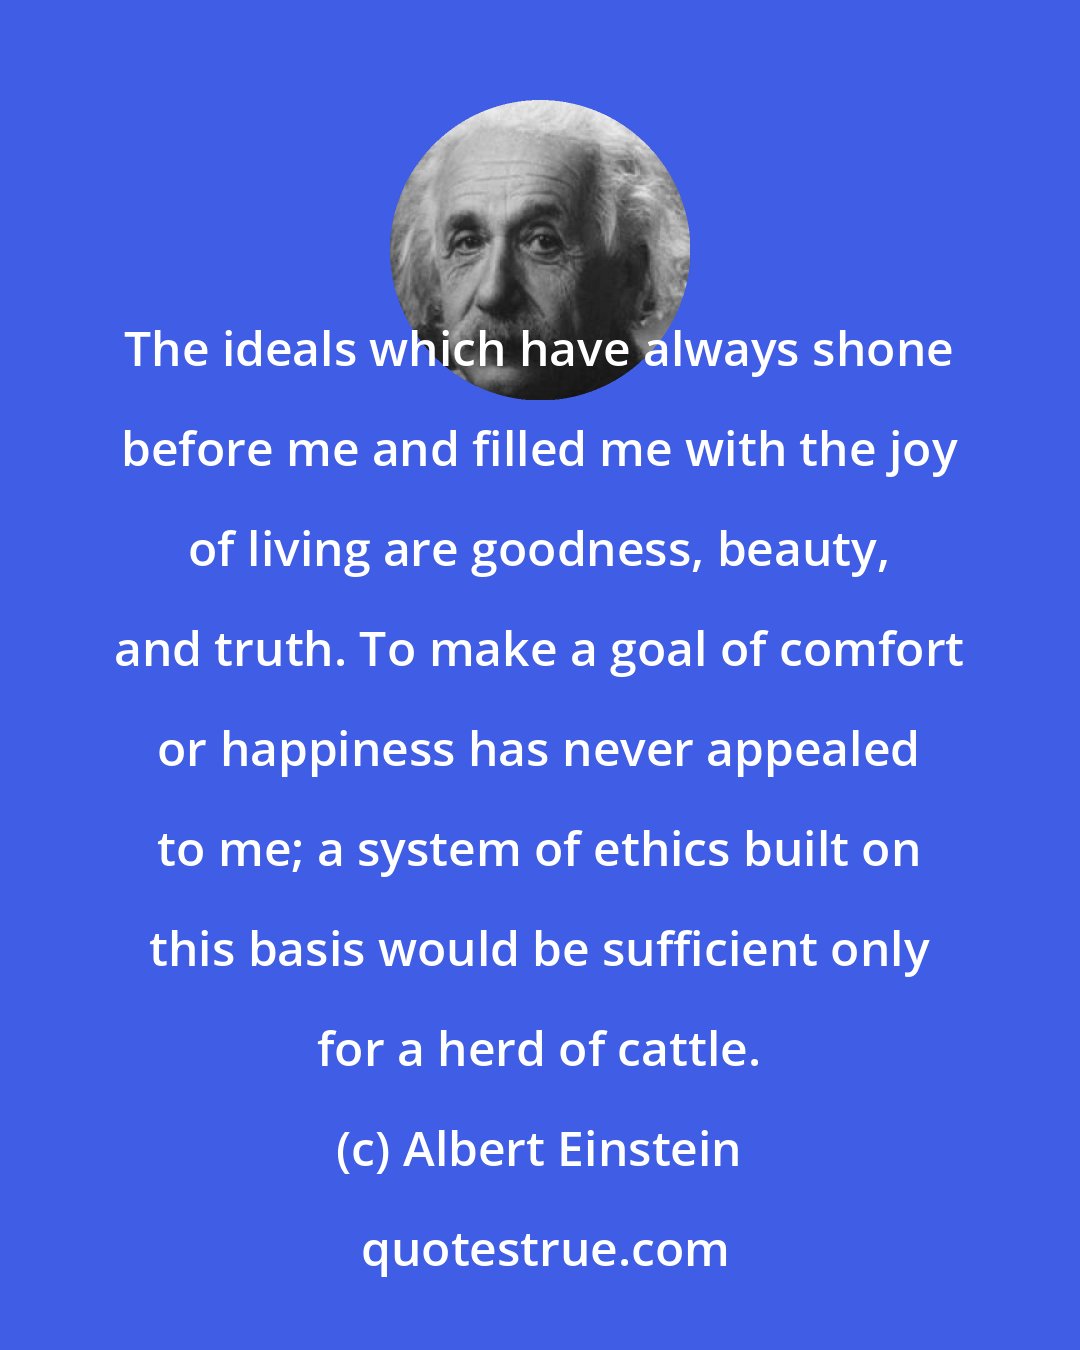 Albert Einstein: The ideals which have always shone before me and filled me with the joy of living are goodness, beauty, and truth. To make a goal of comfort or happiness has never appealed to me; a system of ethics built on this basis would be sufficient only for a herd of cattle.